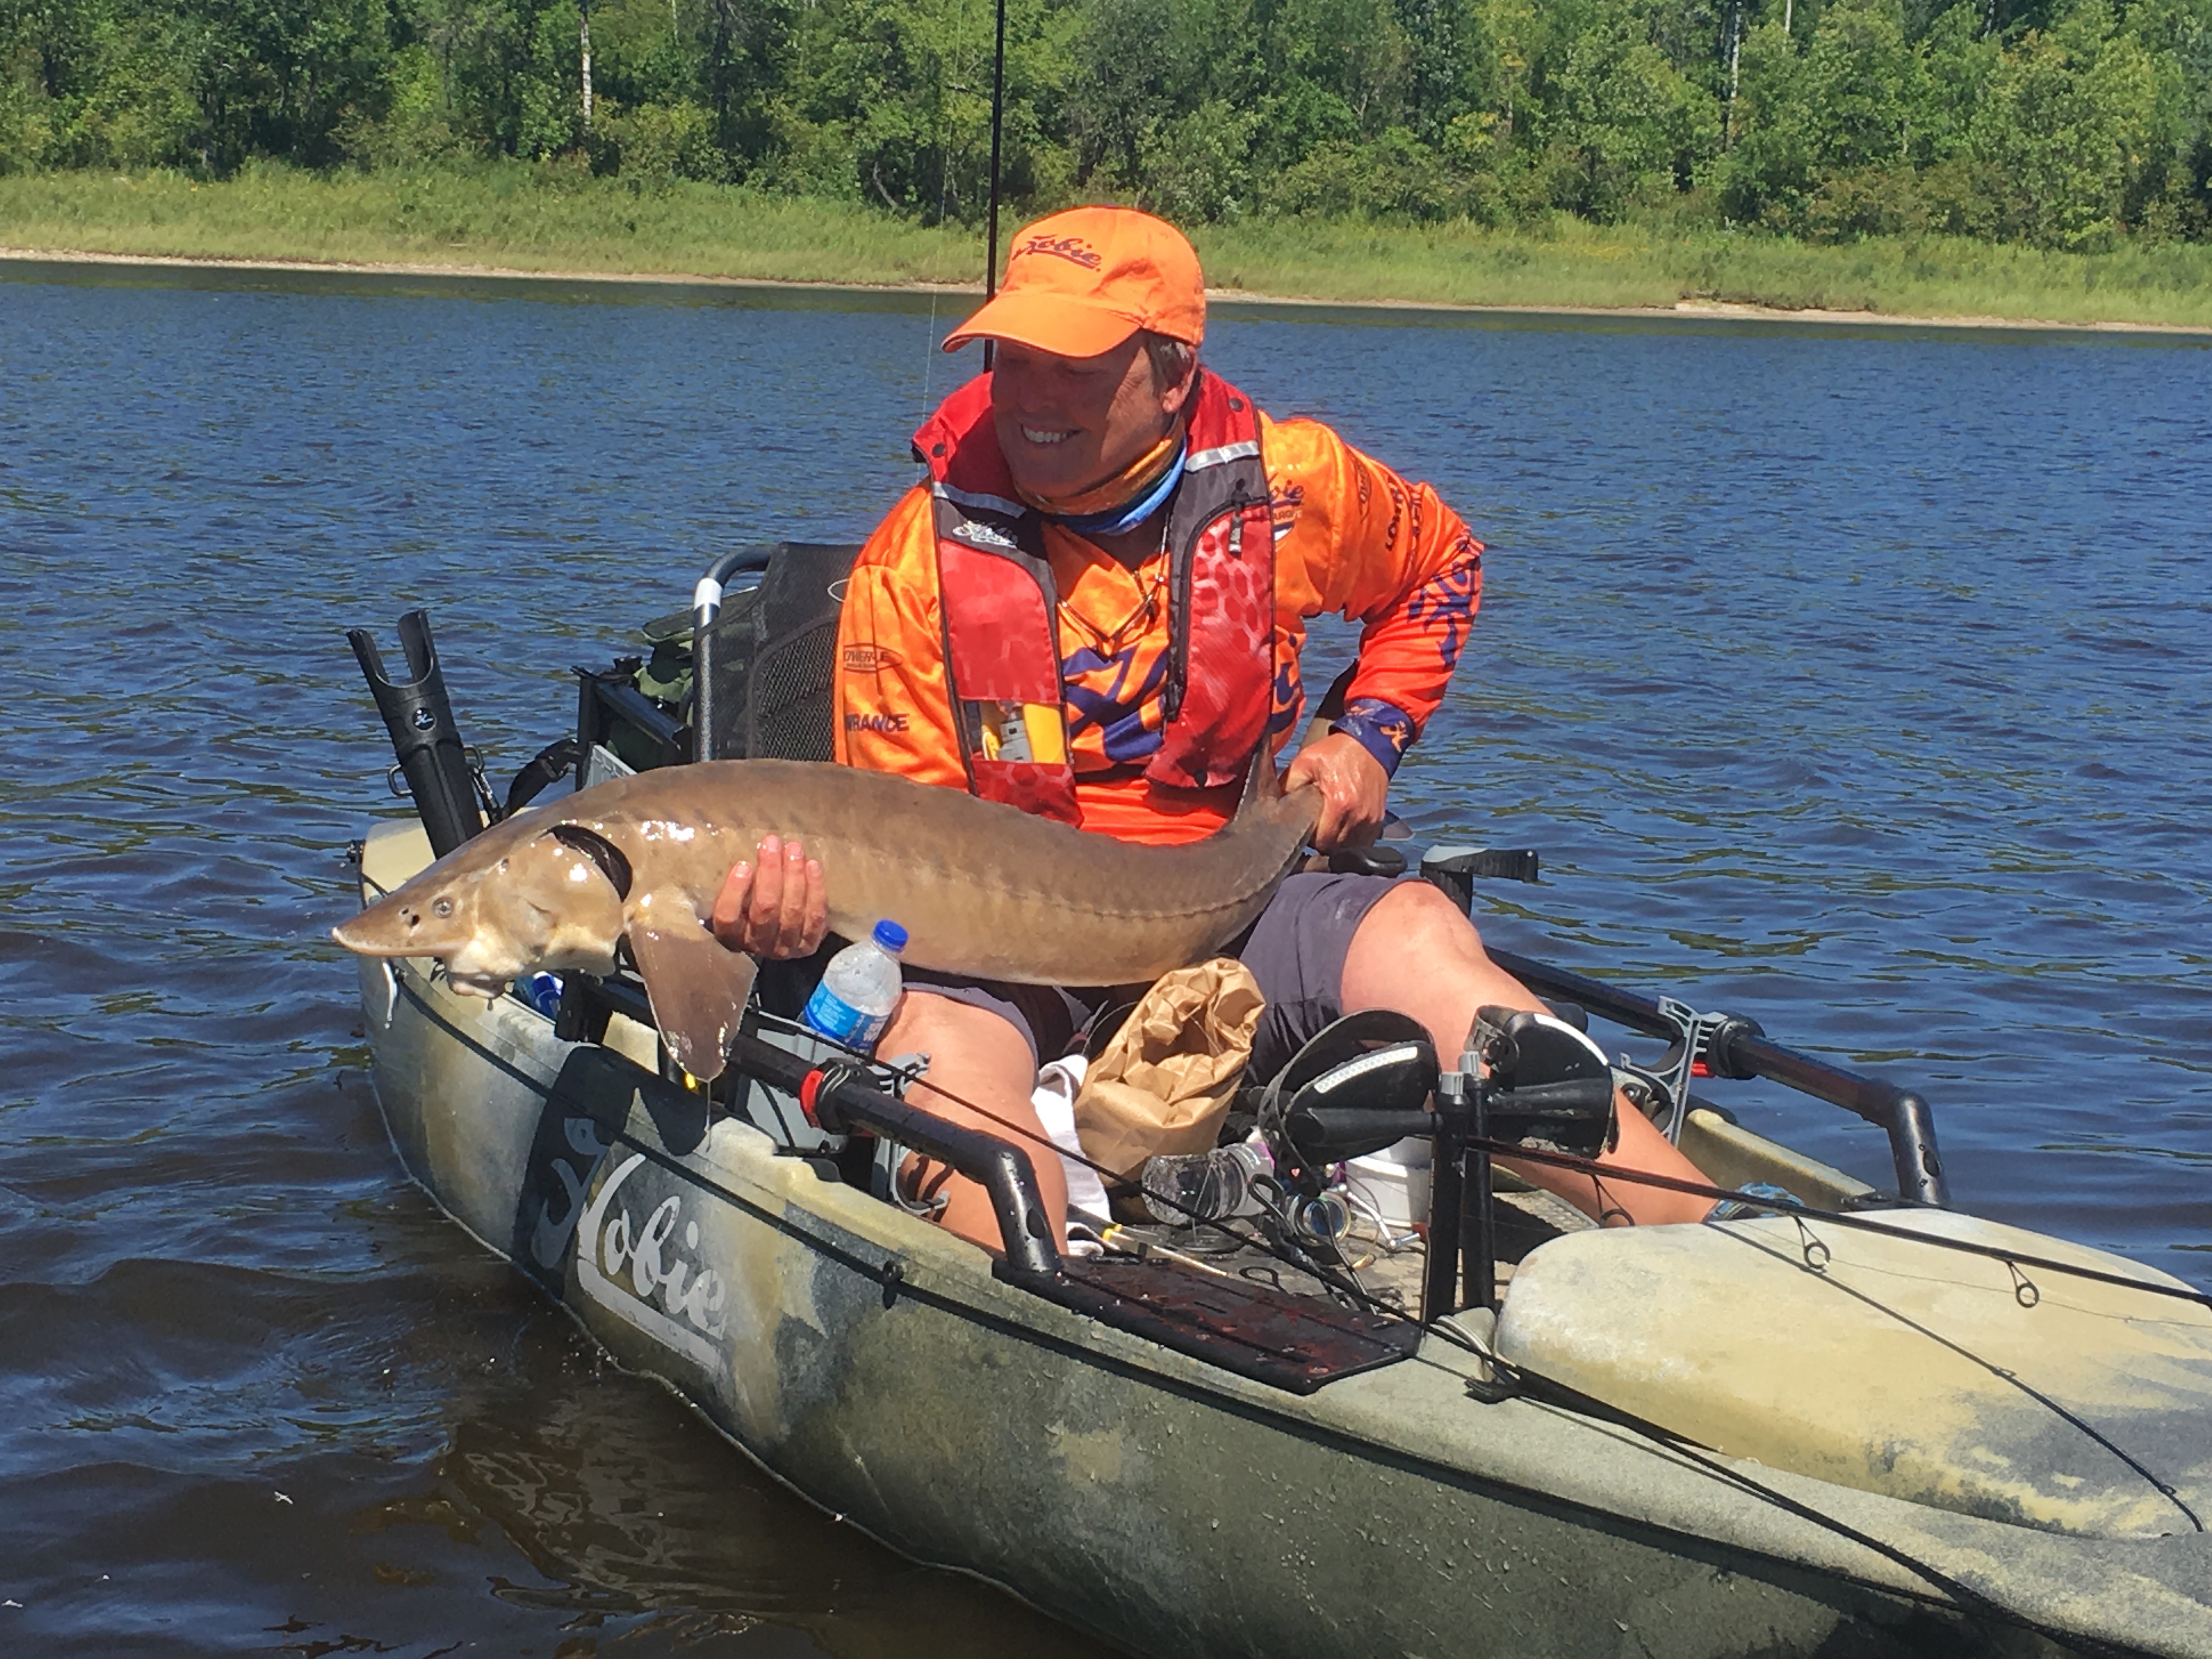 Kayak angling for sturgeon brings new sport to the Northwoods